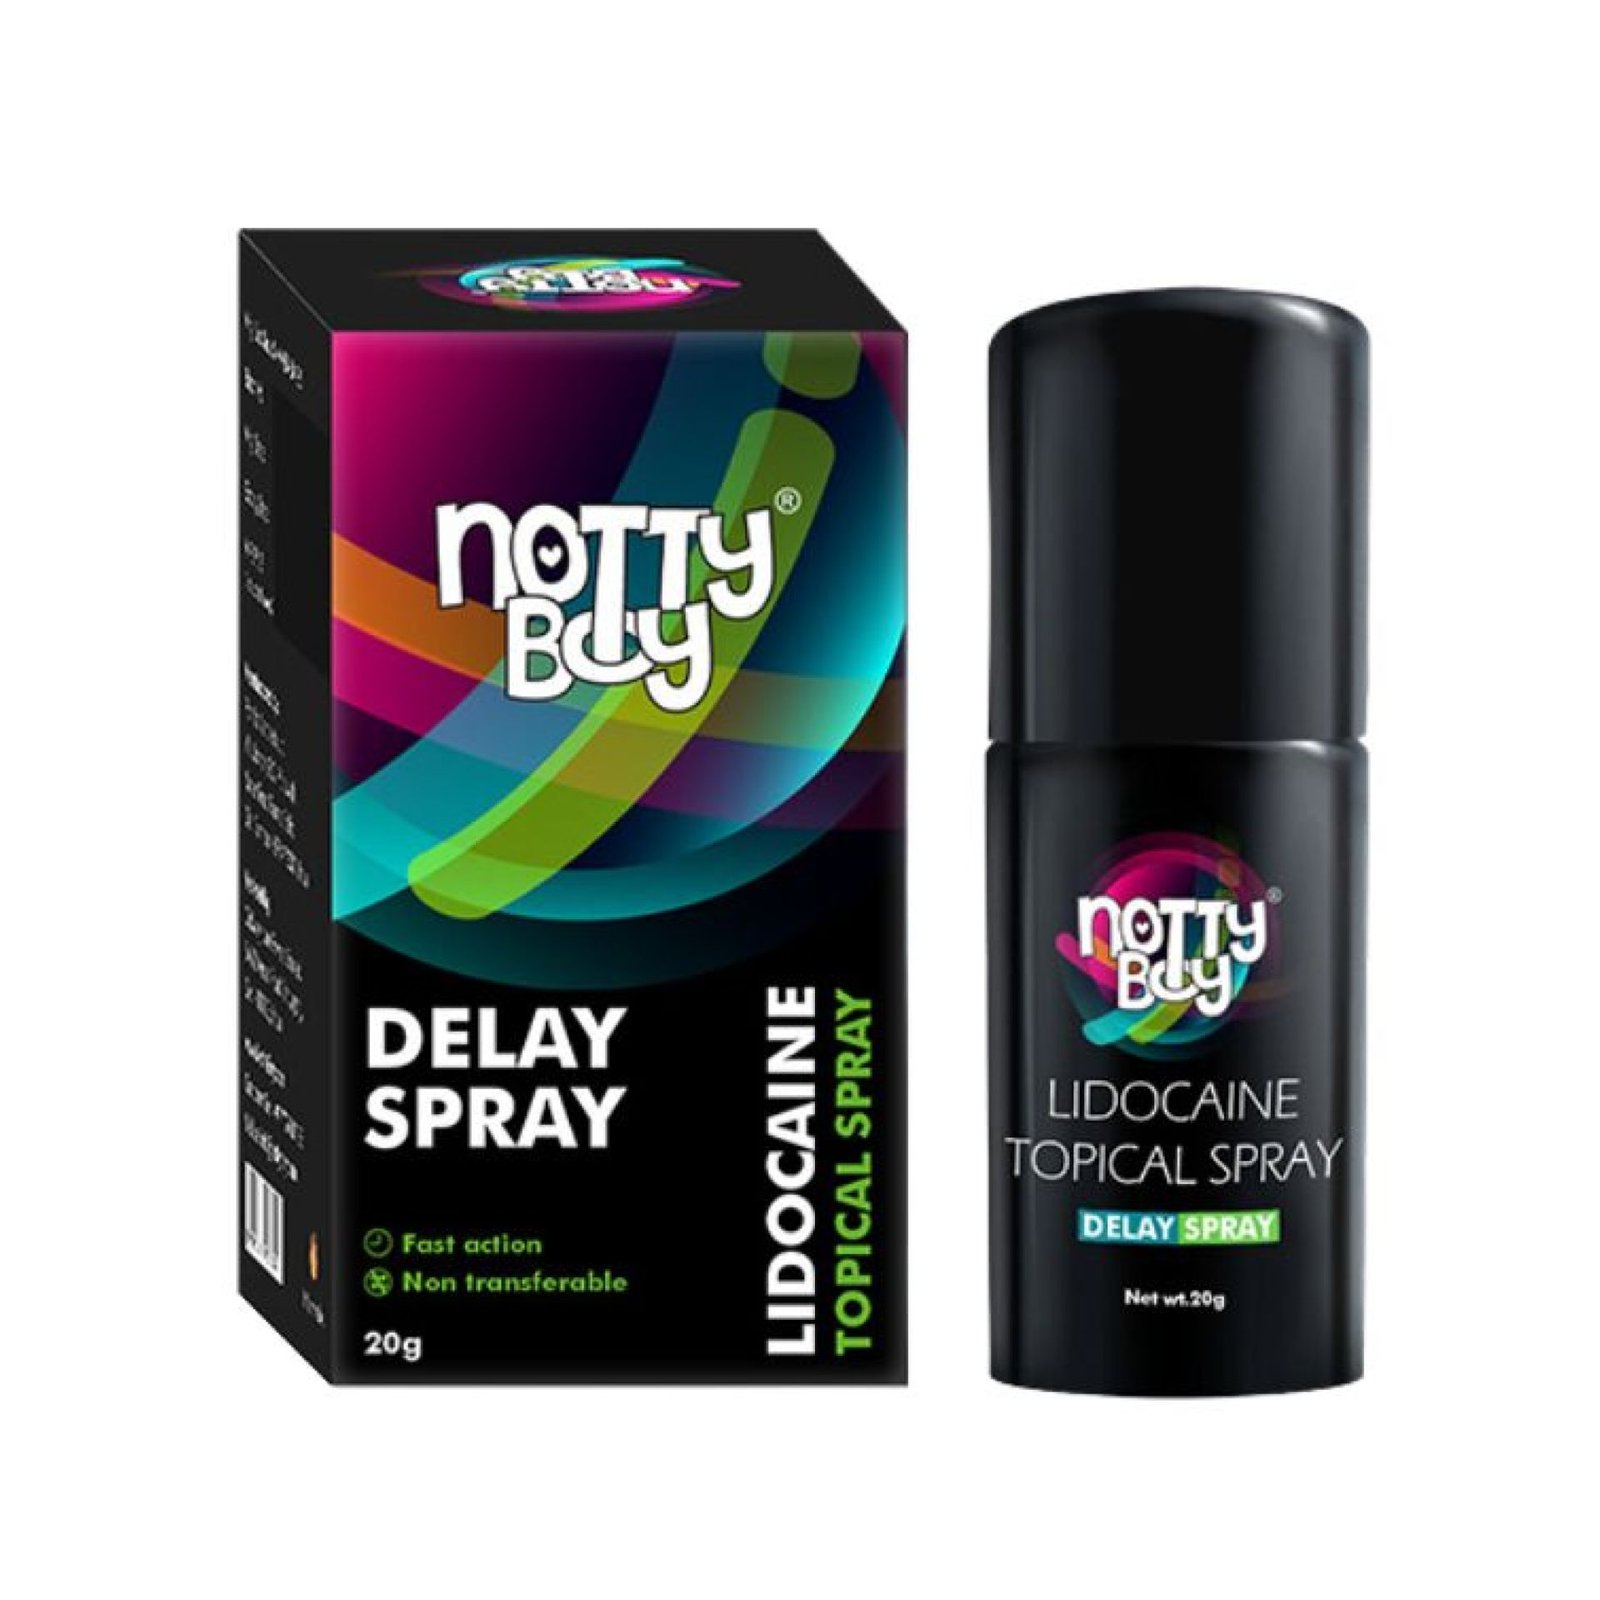 Buy NottyBoy Lidocaine Delay Spray for Men - 20g at Rs. 6800 from Likeshop.pk